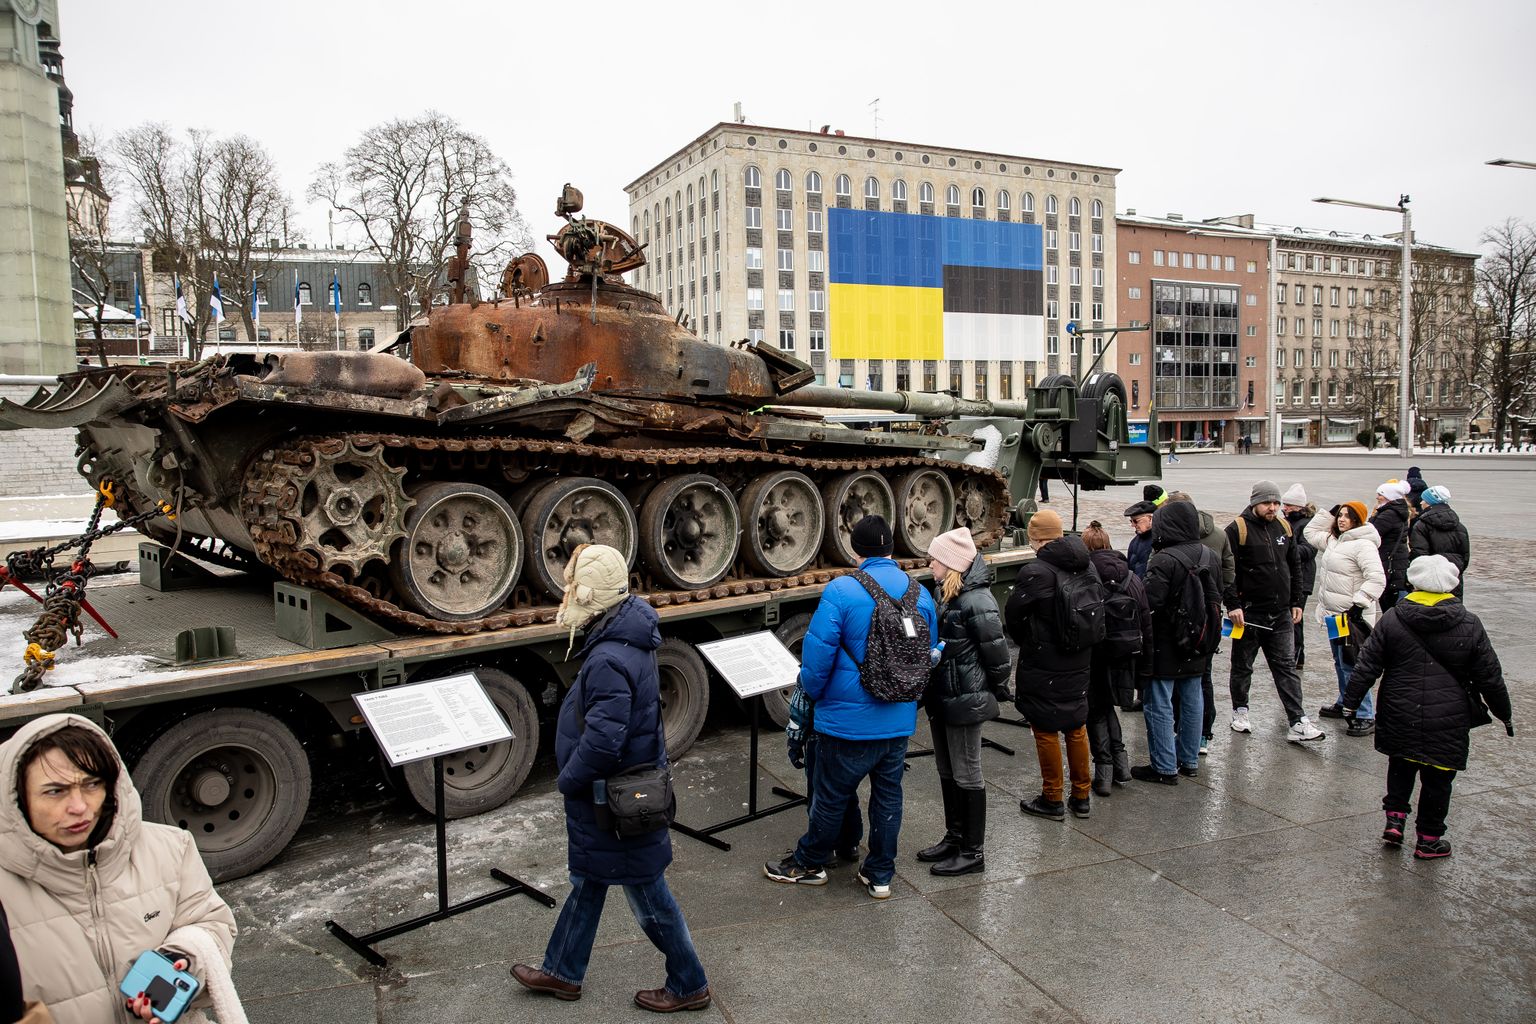 The Estonian police have meted out a fine to a person who placed flowers at the destroyed Russian T-72 tank that is being displayed on Freedom Square in Tallinn.